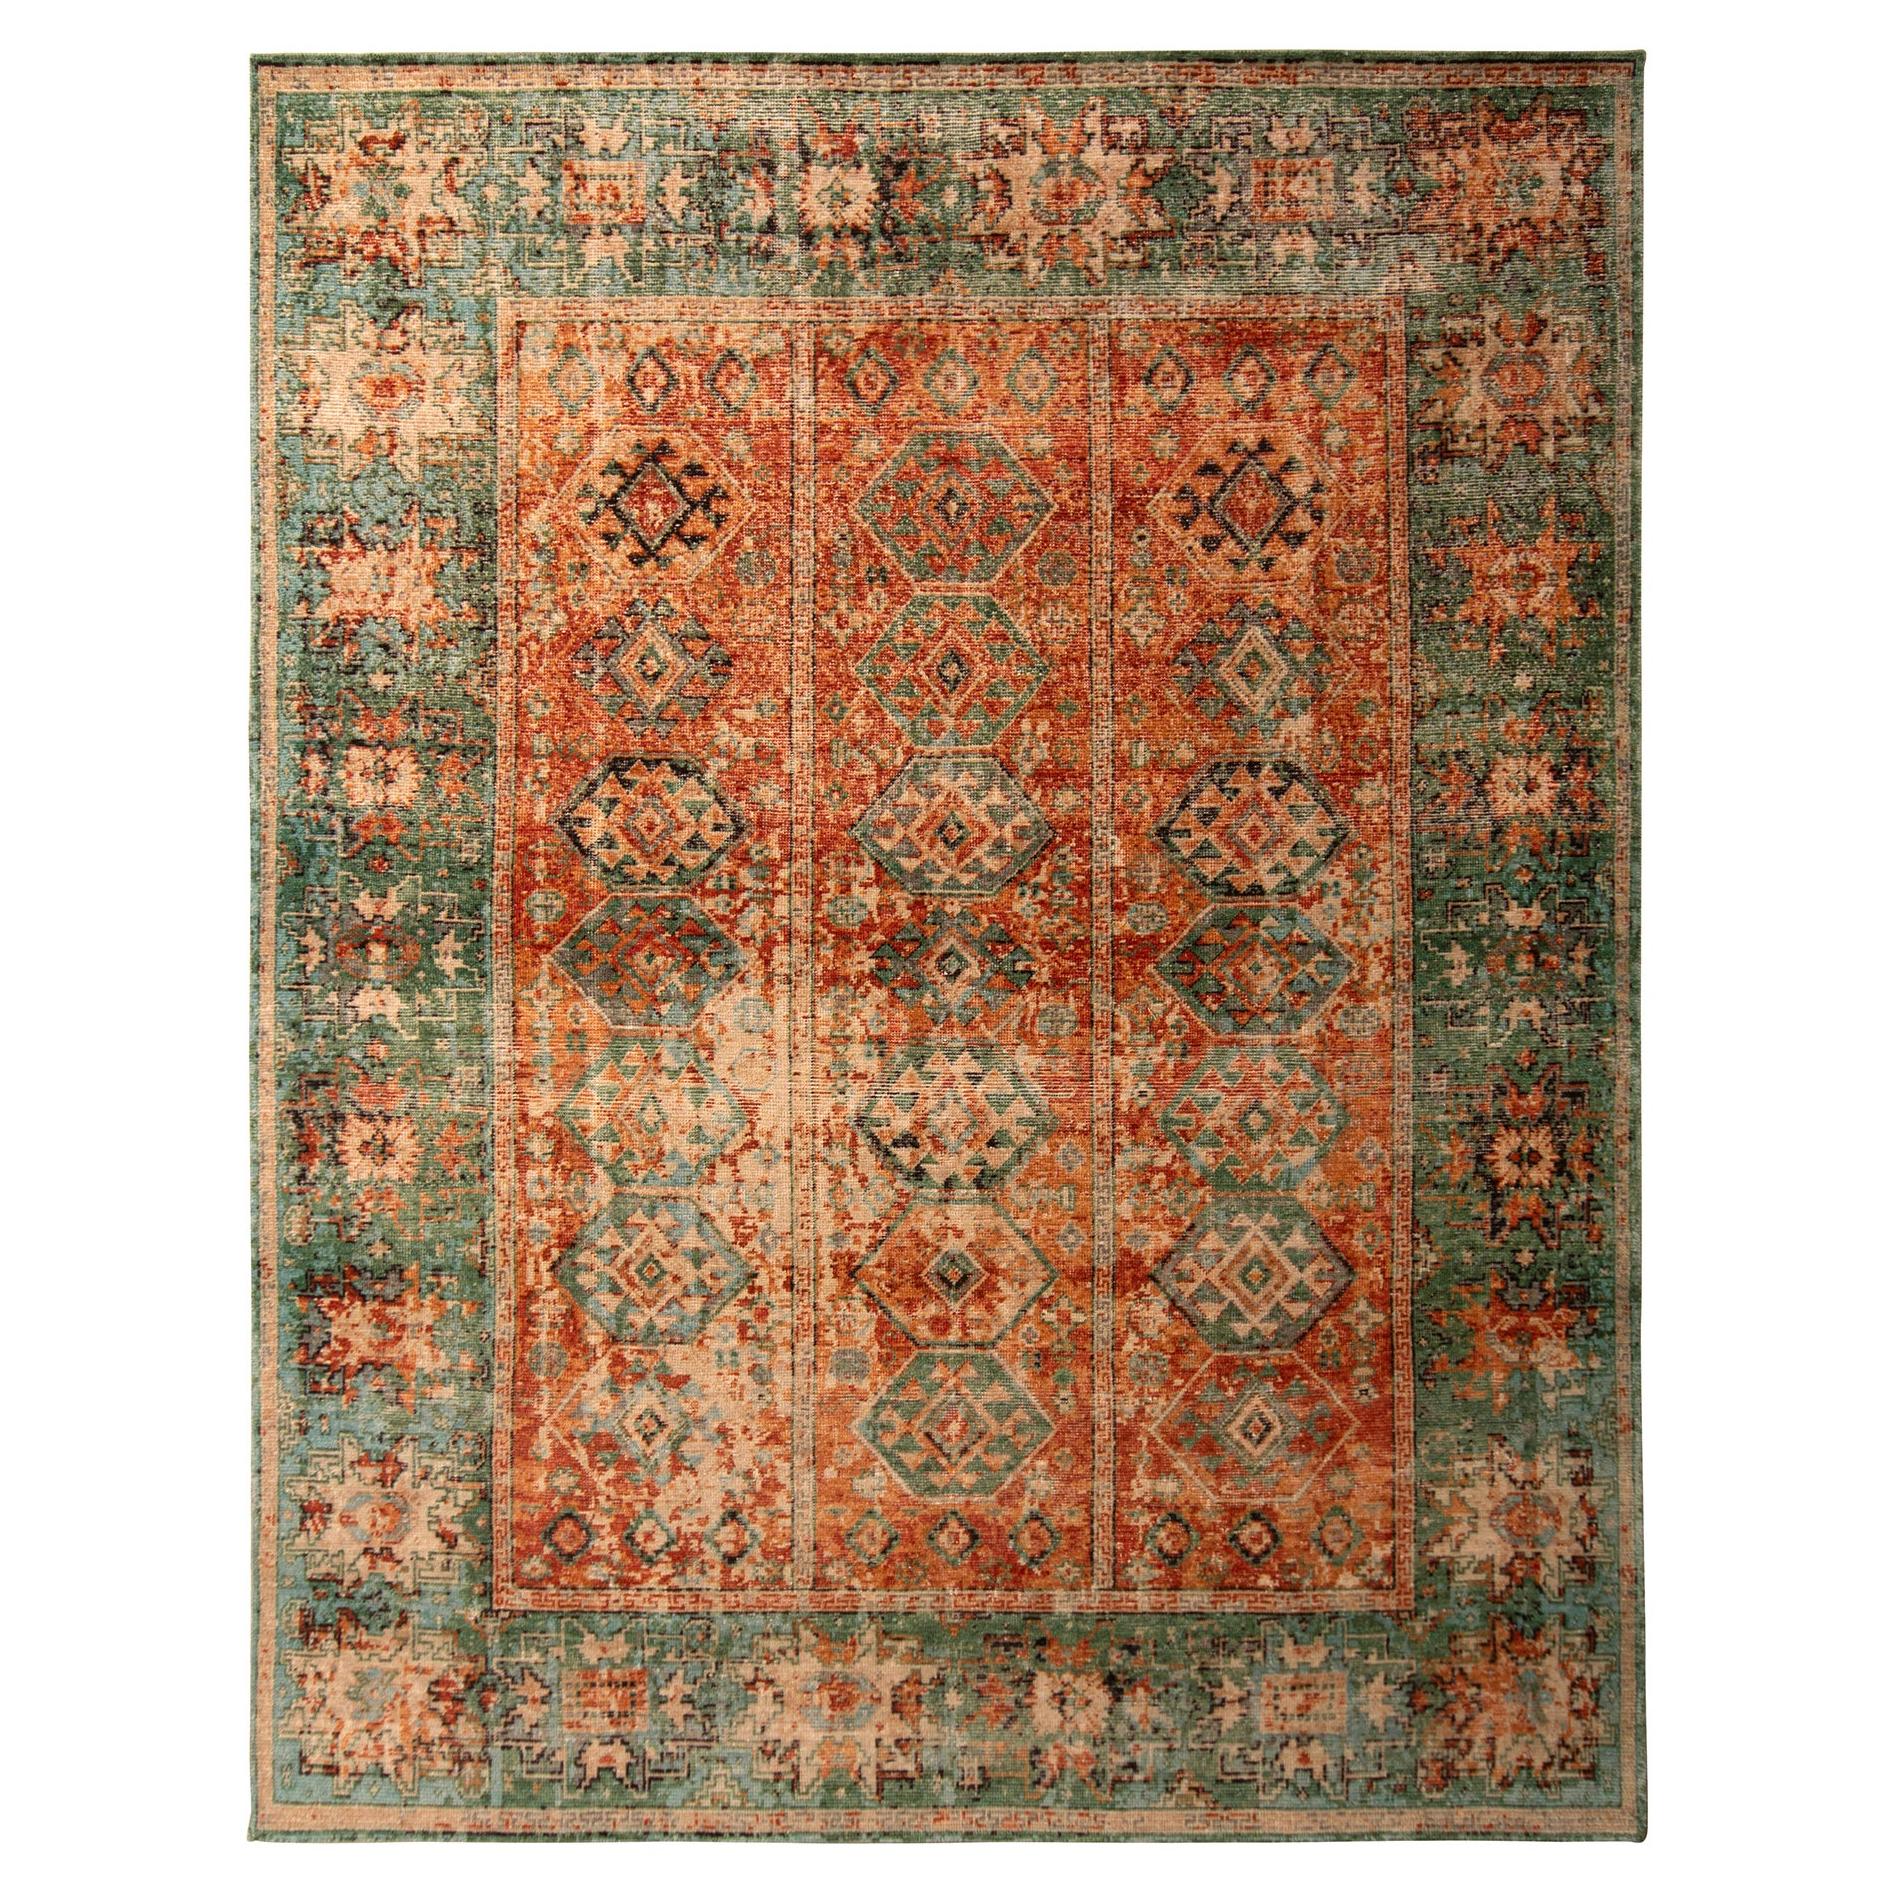 Rug & Kilim's Hand-Knotted Classic Geometric Pattern Rug with Orange Green Color